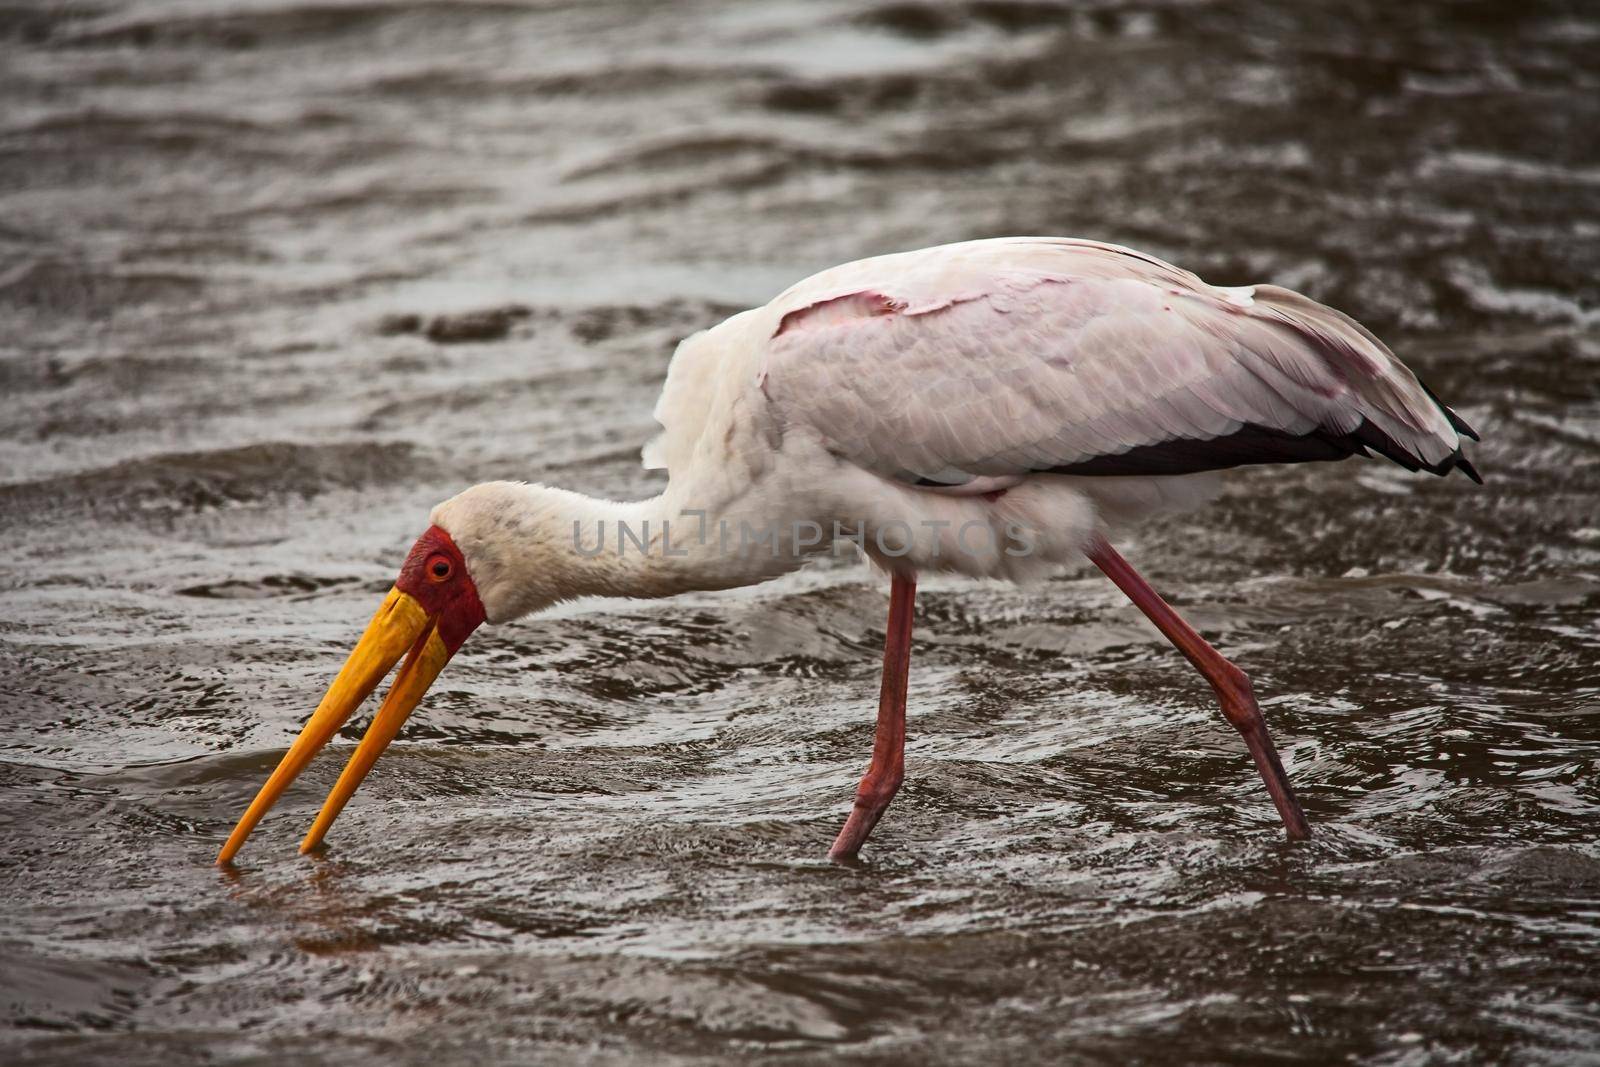 The Yellow-billed Stork (Mycteria ibis) is more tied to wetland habitats than most other storks and hunt almost exclusively in shallow water